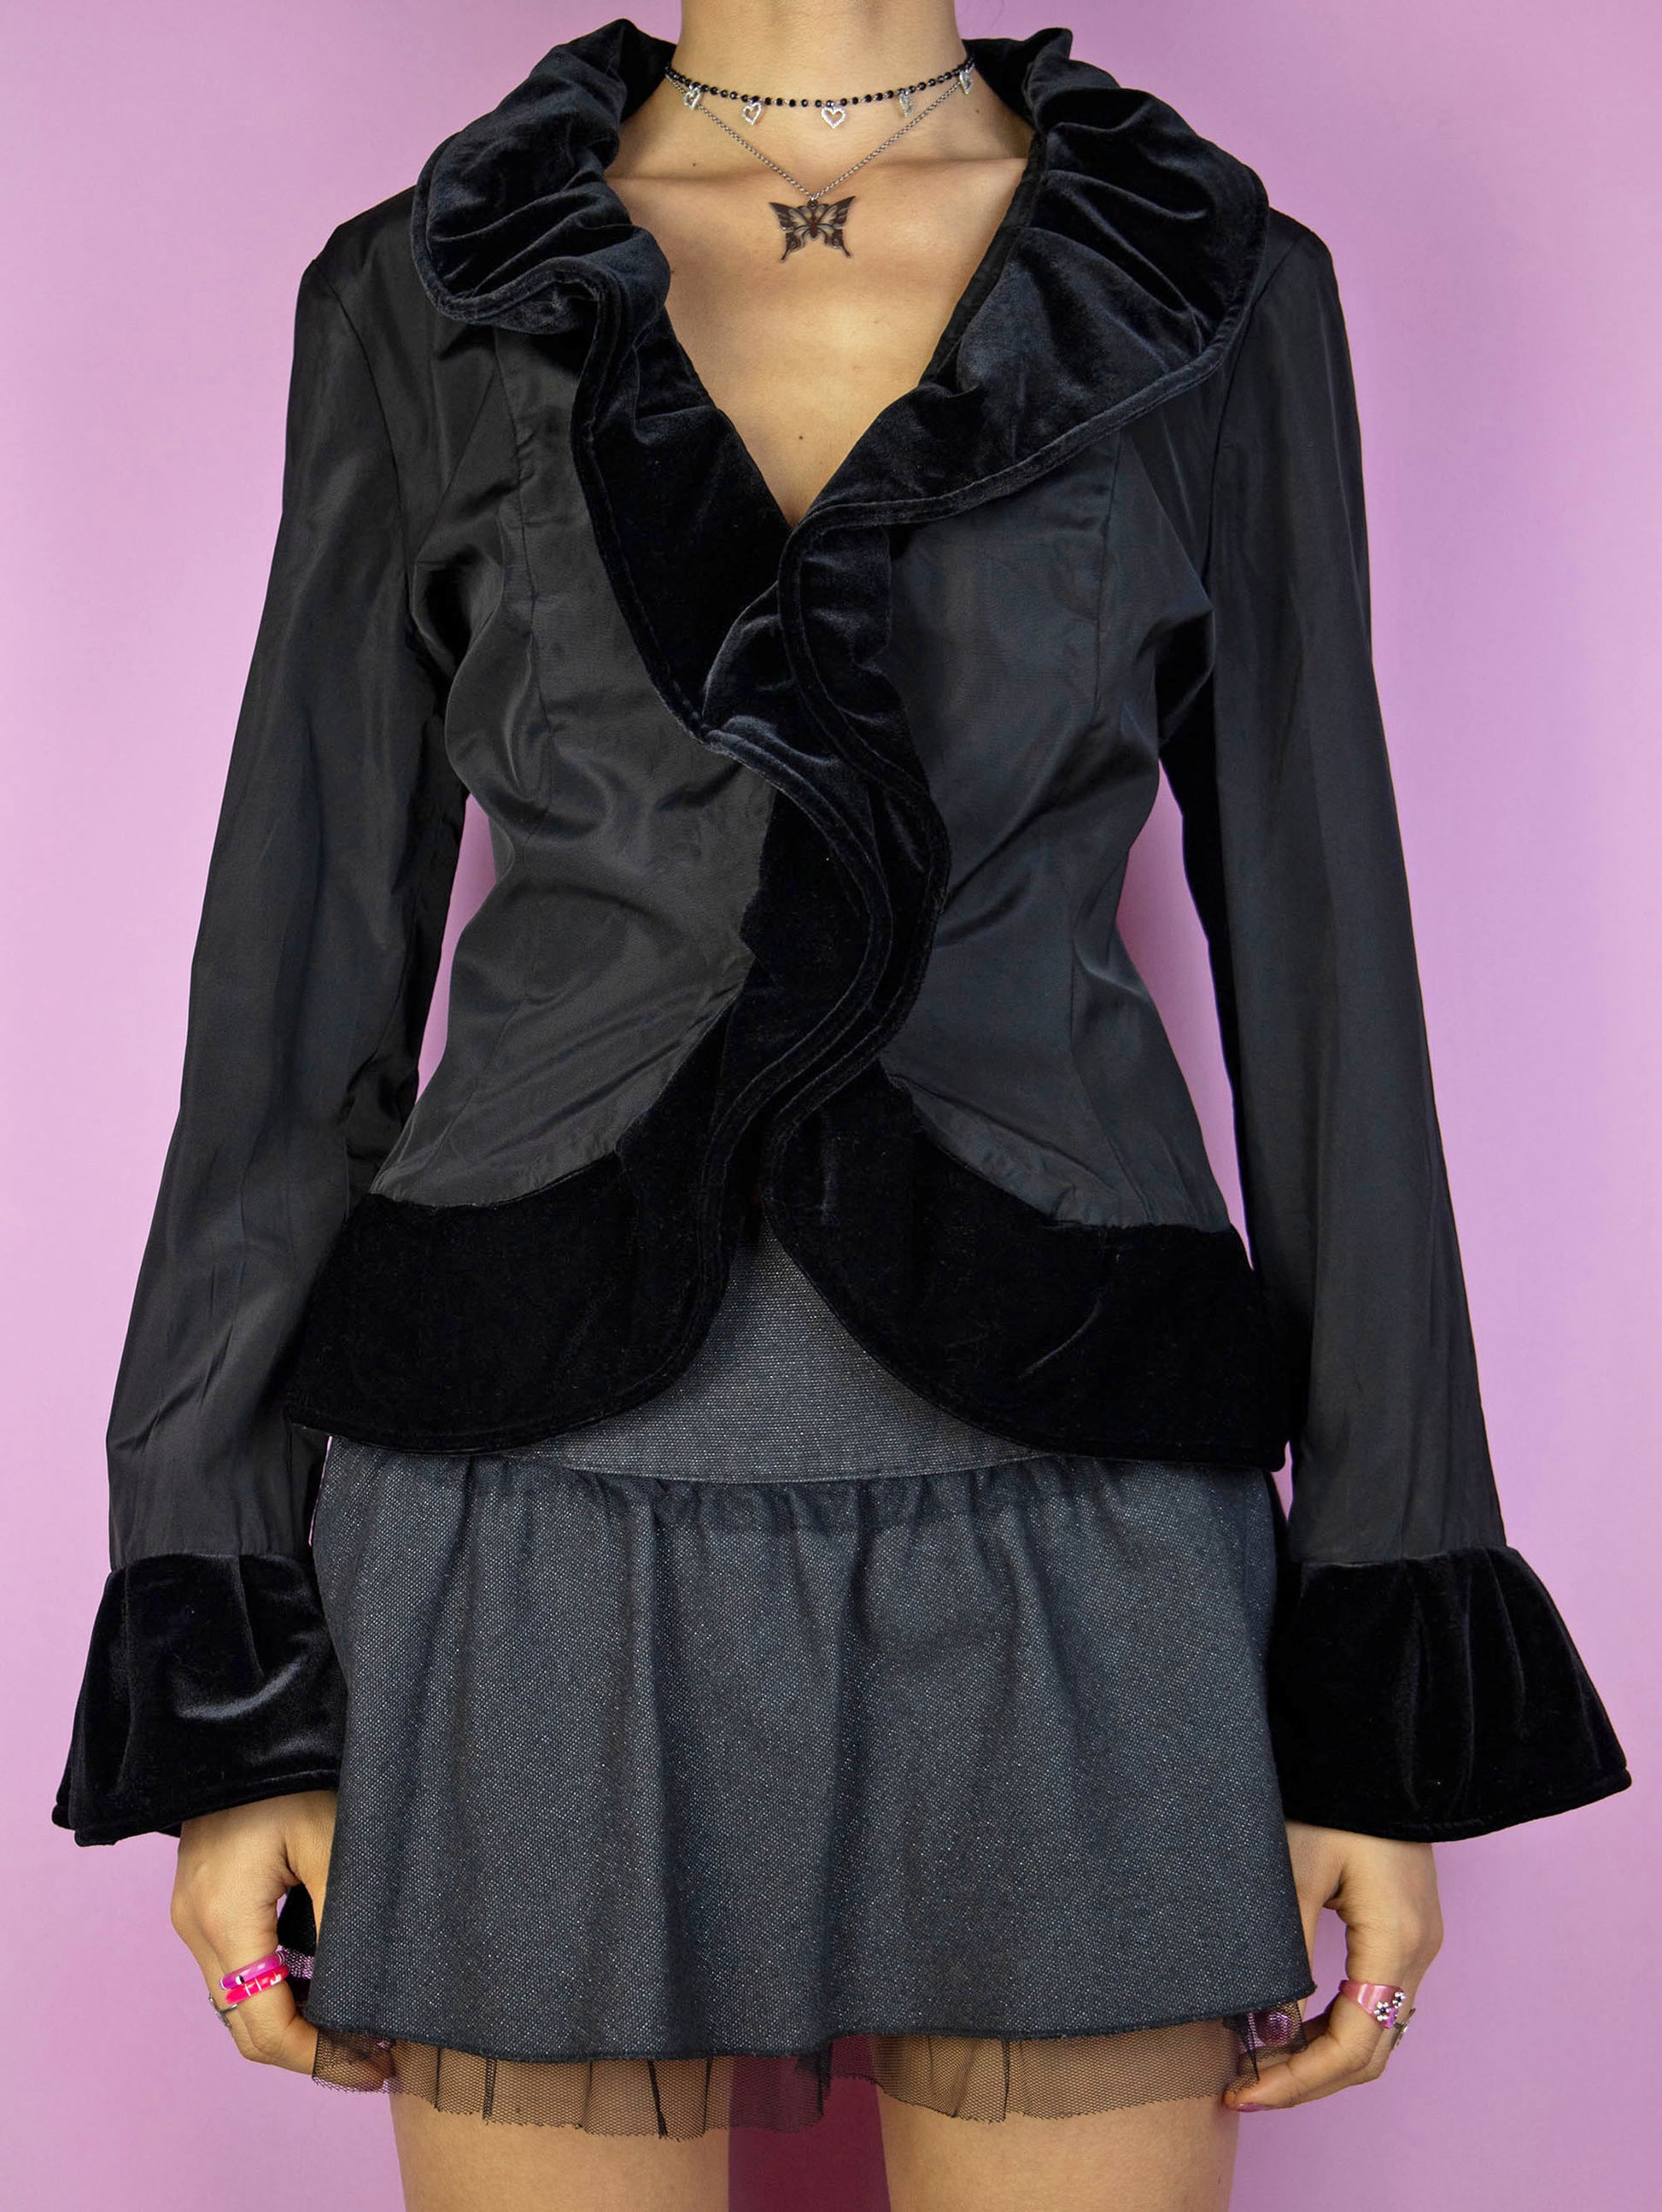 The Vintage 90s Black Ruffle Jacket is a black velvet ruffled jacket with front hook closure. Gorgeous romantic dark fairy whimsygoth 1990s elegant party night statement coat.